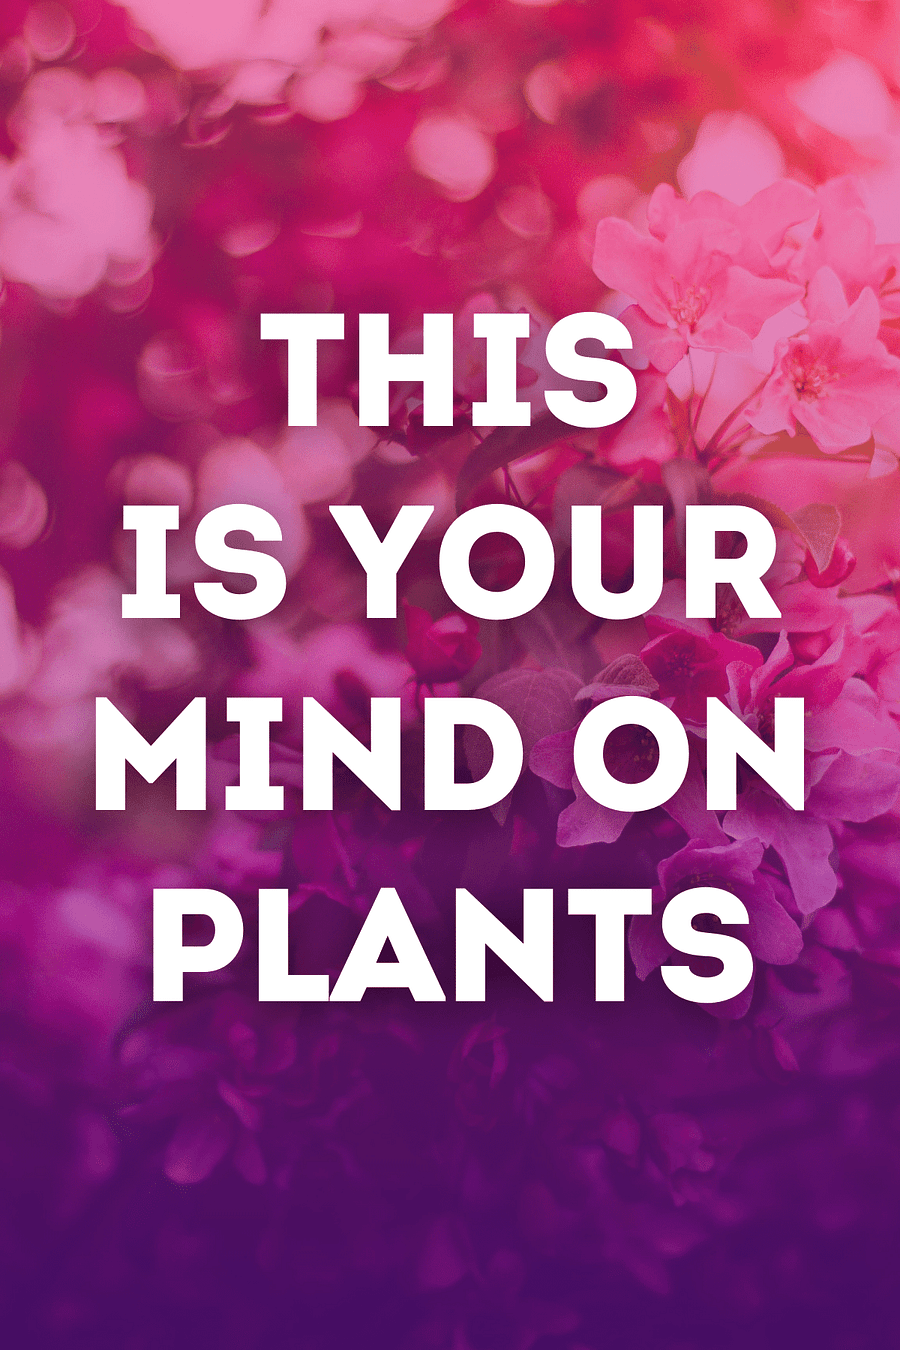 This Is Your Mind on Plants by Michael Pollan - Book Summary